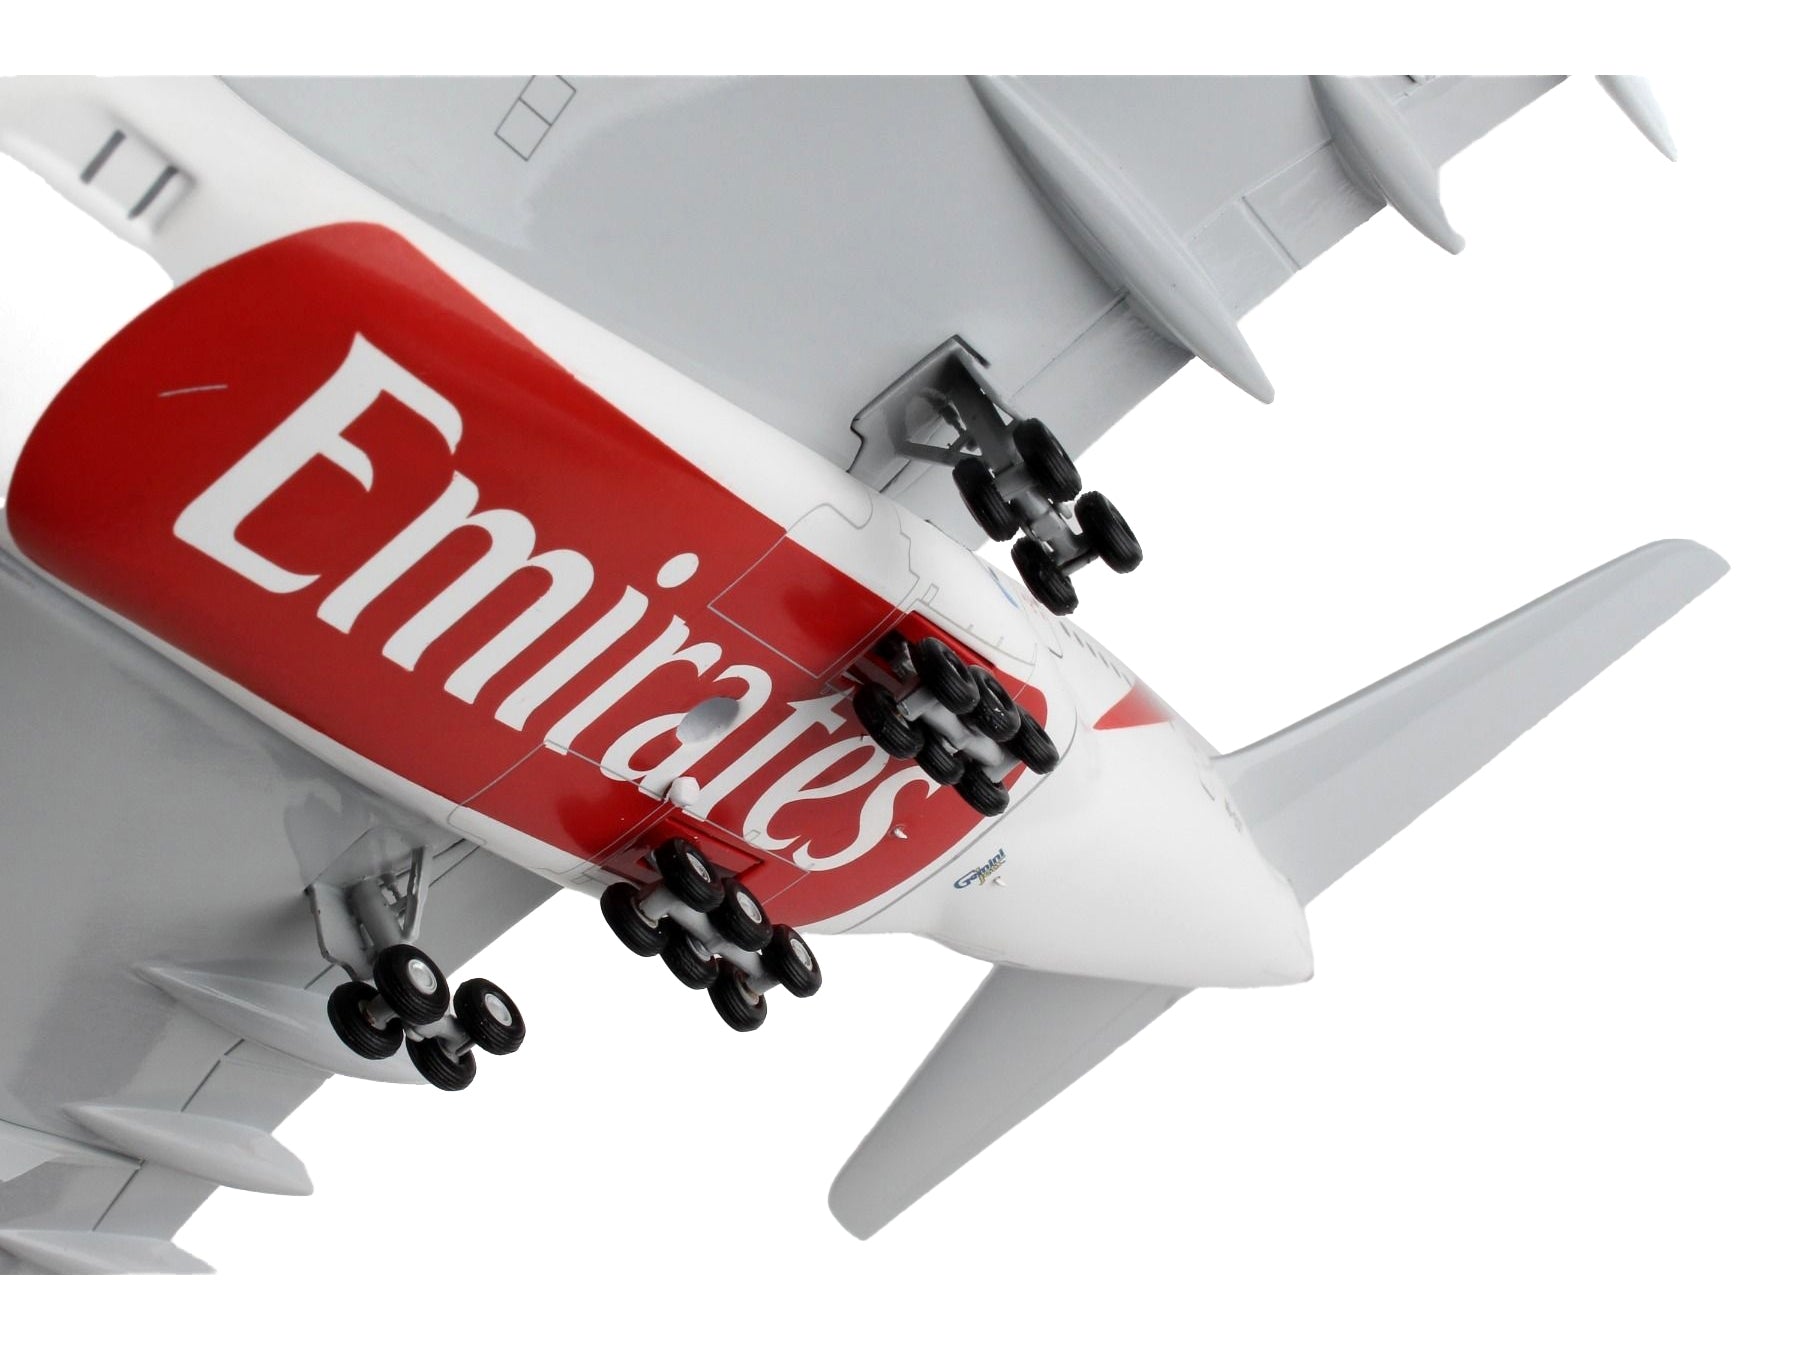 Airbus A380-800 Commercial Aircraft "Emirates Airlines - Dubai Expo 2020" White with Blue Graphics